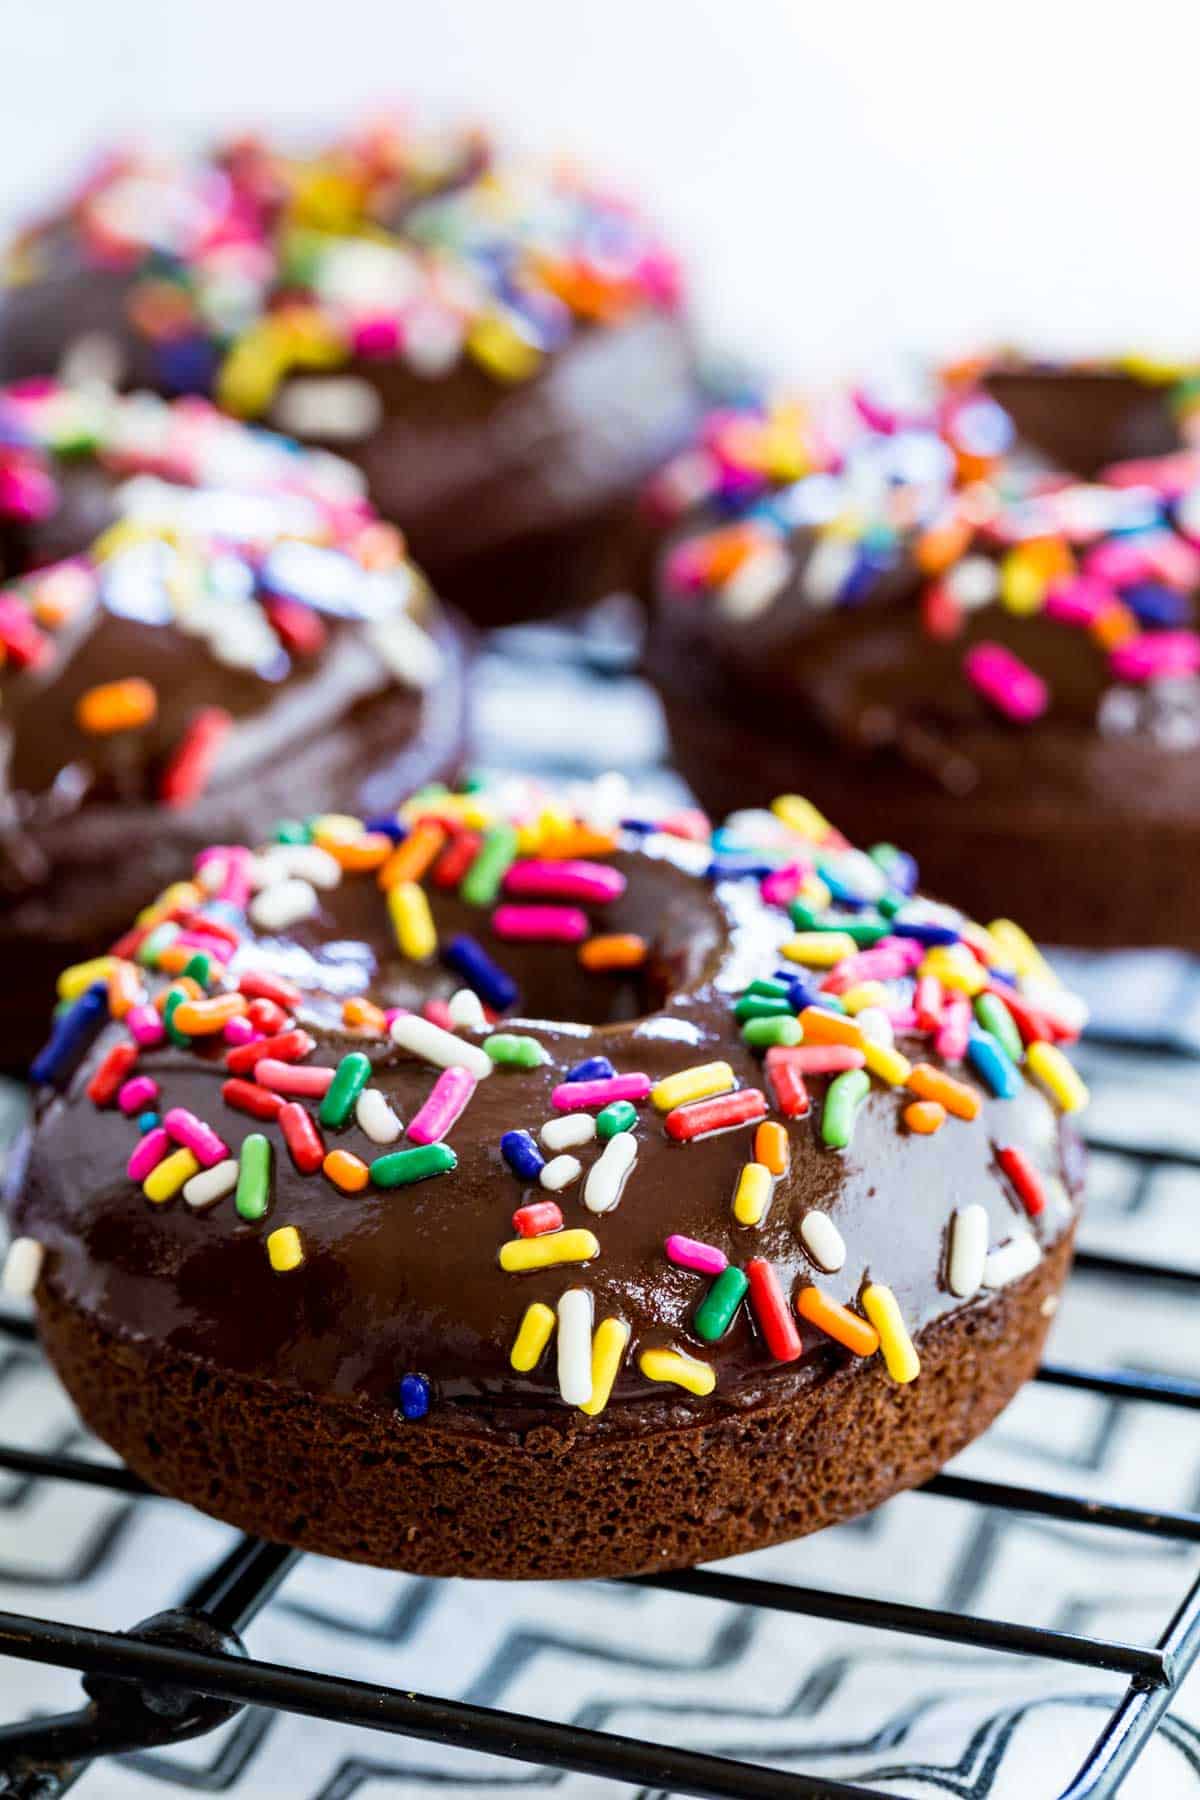 Glazed and decorated gluten-free chocolate donuts on a wire rack.